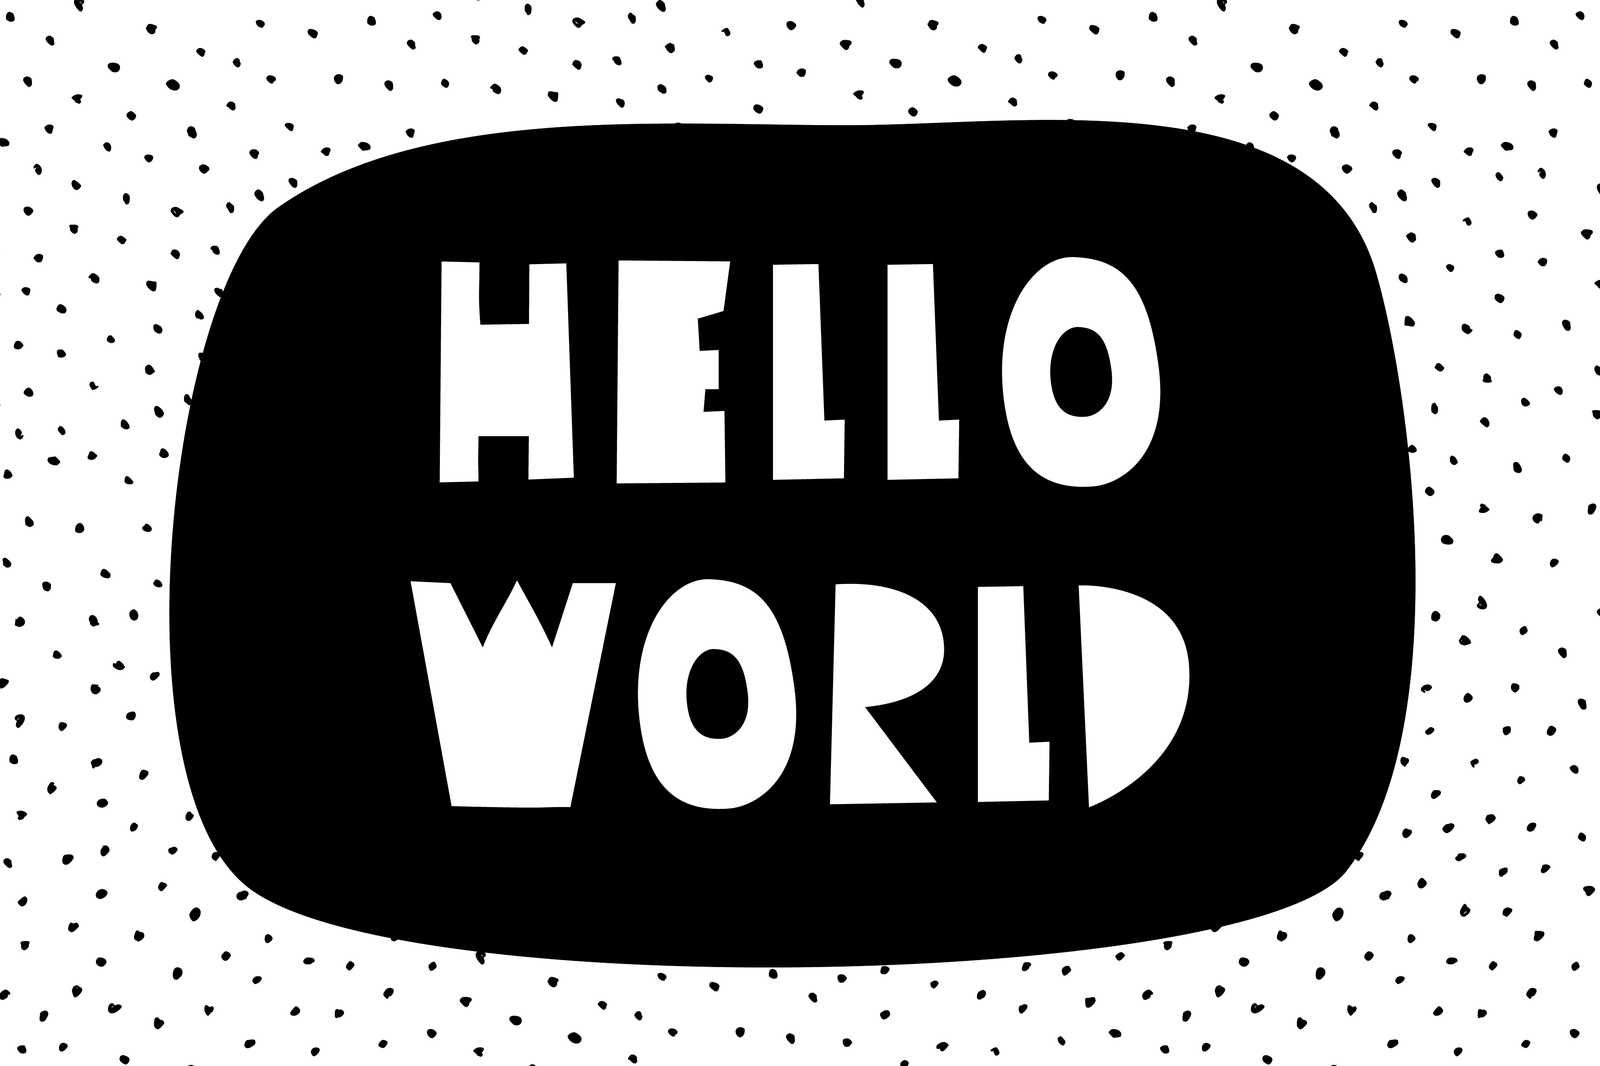             Canvas for children's room with lettering "Hello World" - 120 cm x 80 cm
        